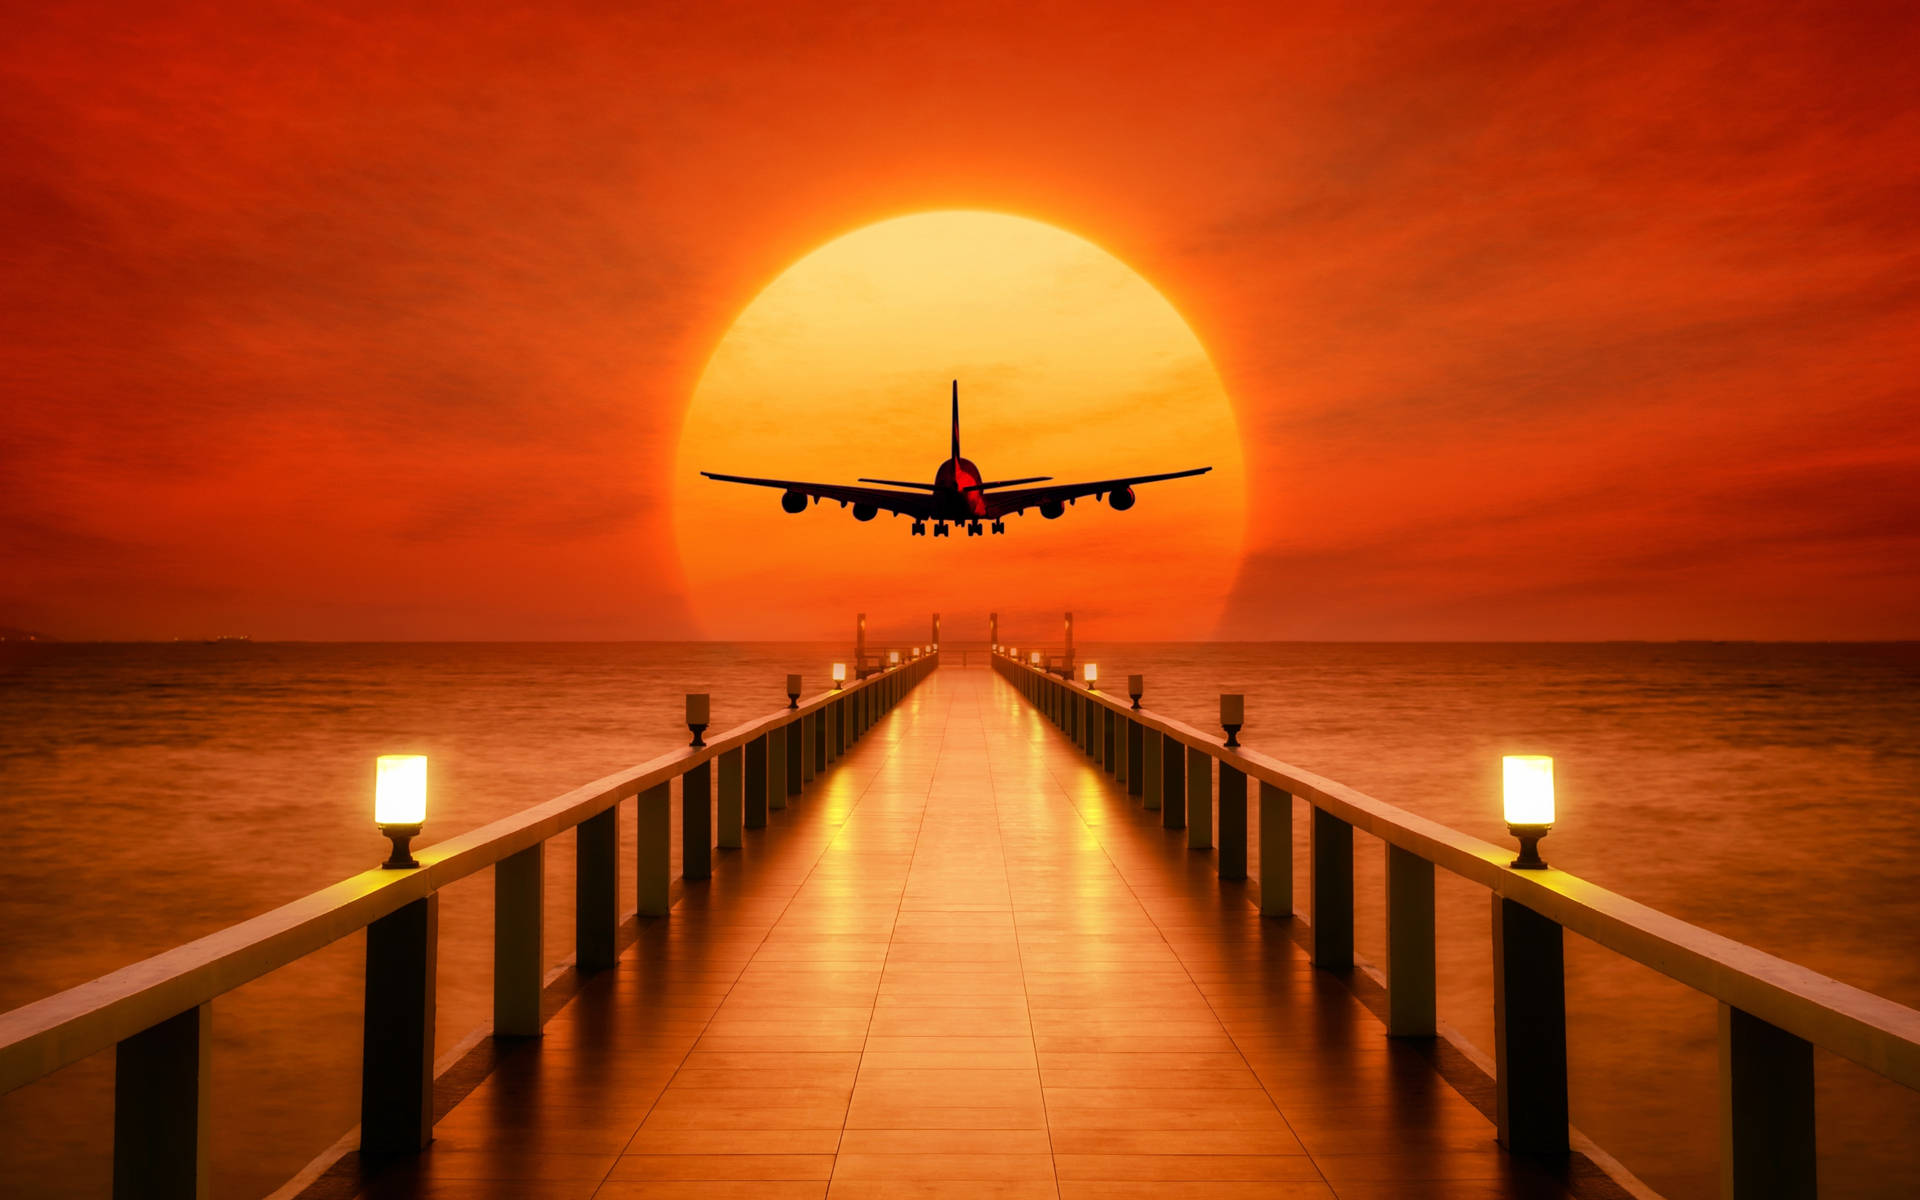 Airplane In Sunset Photoshop Hd Wallpaper